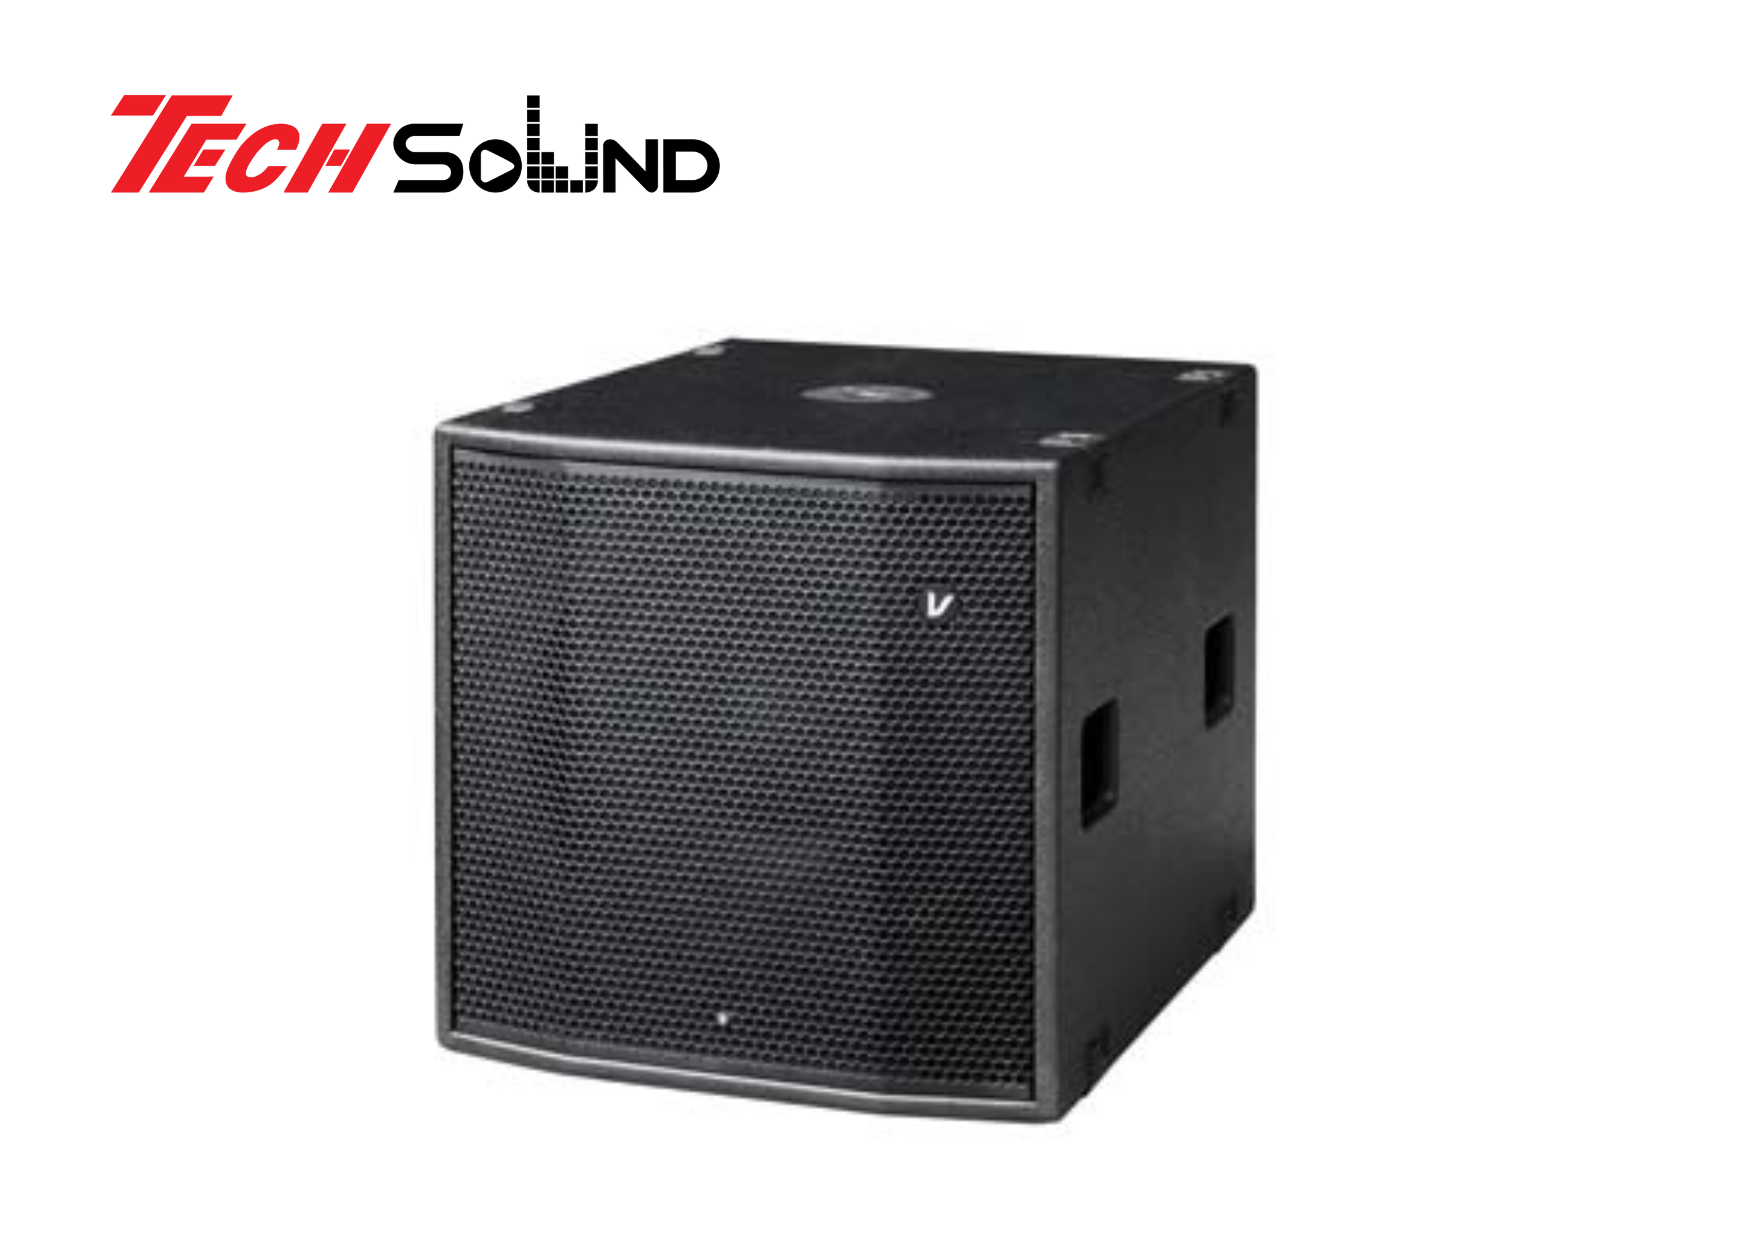 hinh anh Loa subwoofer Passive Verity SUB115P so 1